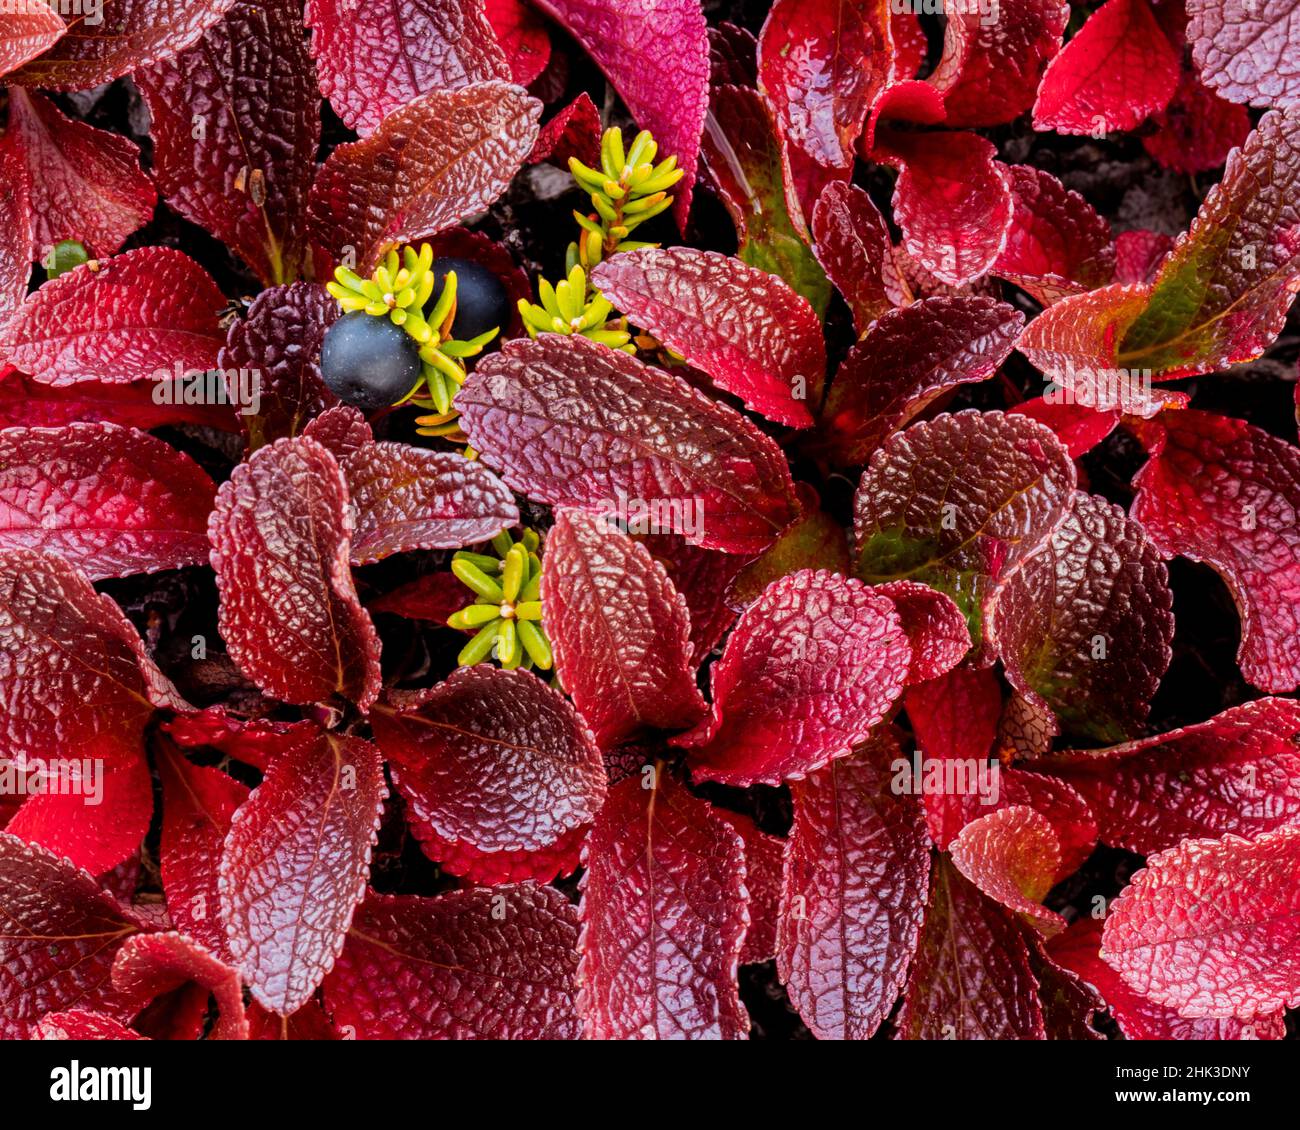 USA, Alaska. Close-up of alpine bearberry and crowberry plants. Credit as: Don Paulson / Jaynes Gallery / DanitaDelimont.com Stock Photo